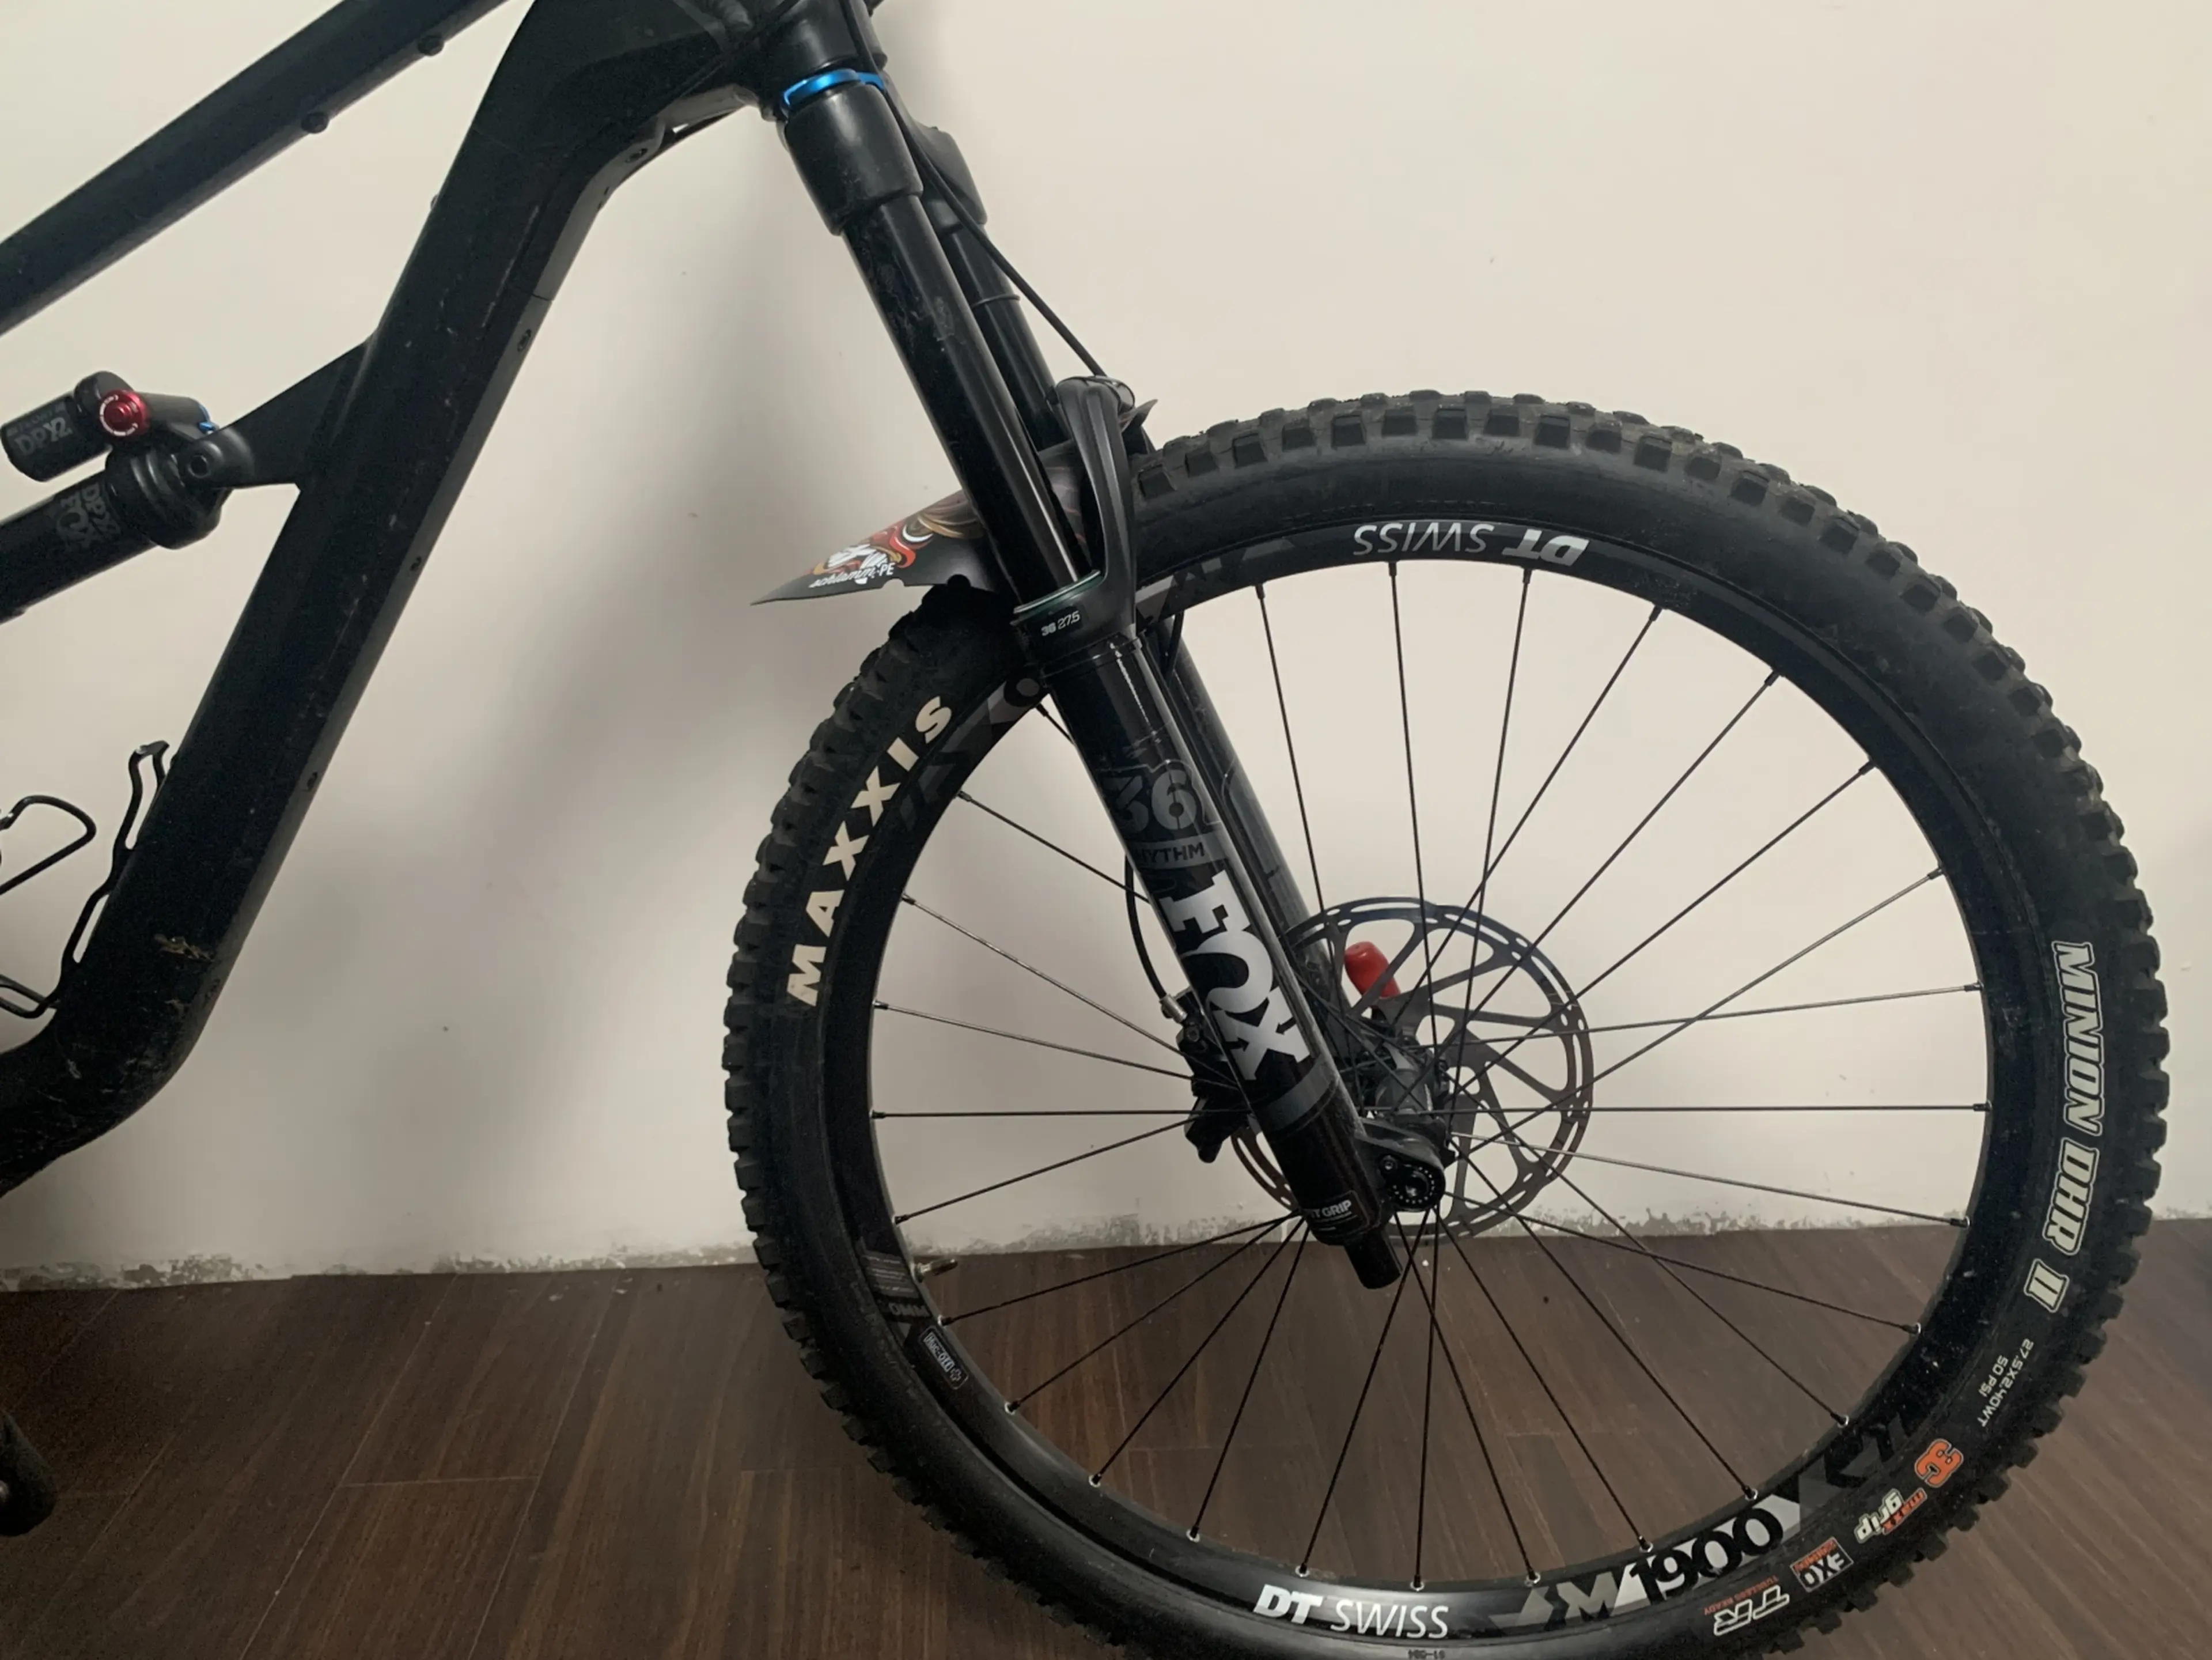 7. Vand Full-Suspension Canyon Spectral AL 6.0